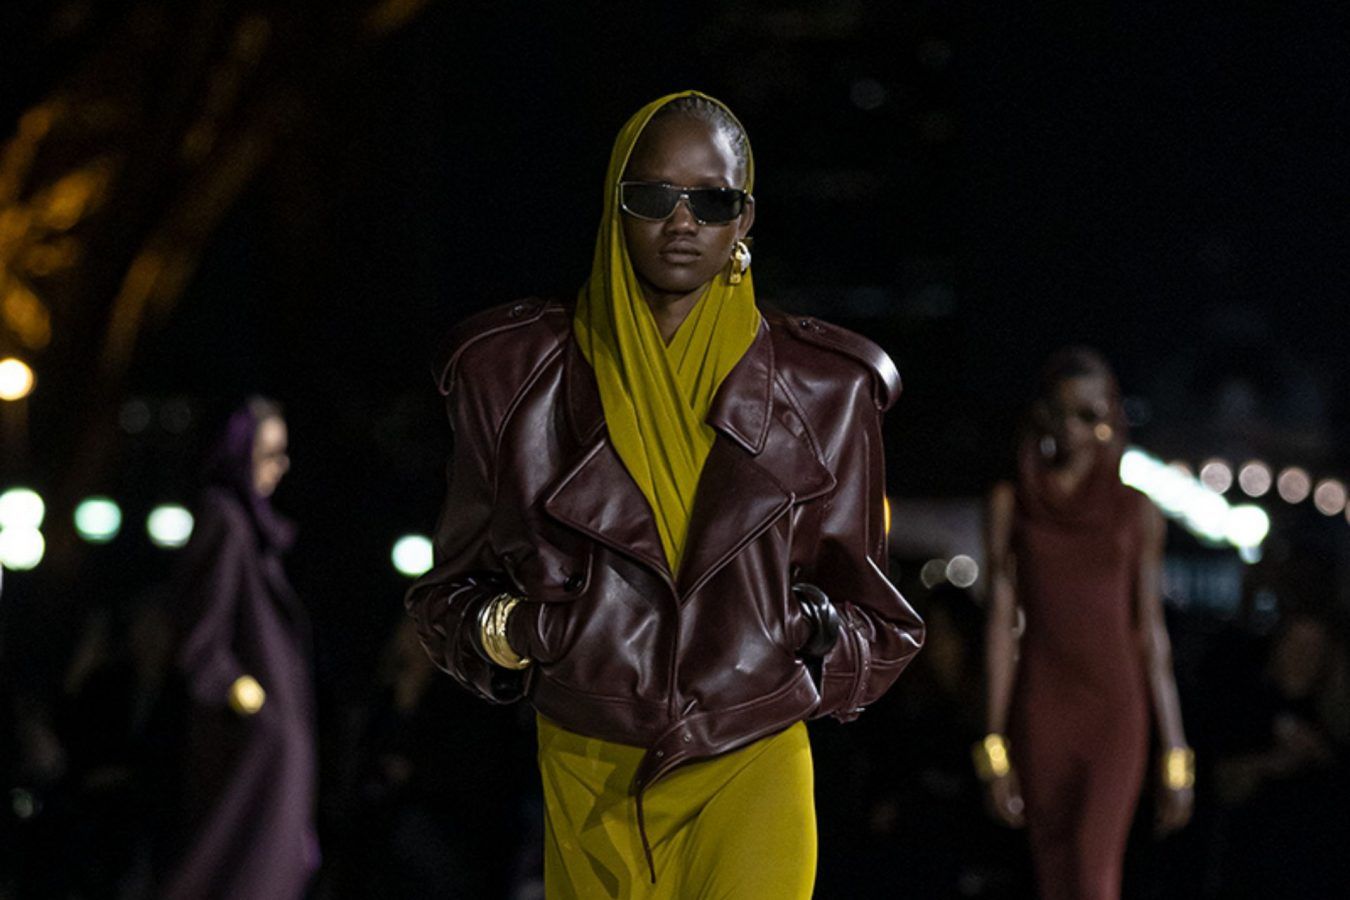 Best spring/summer 2023 trends from the runway shows